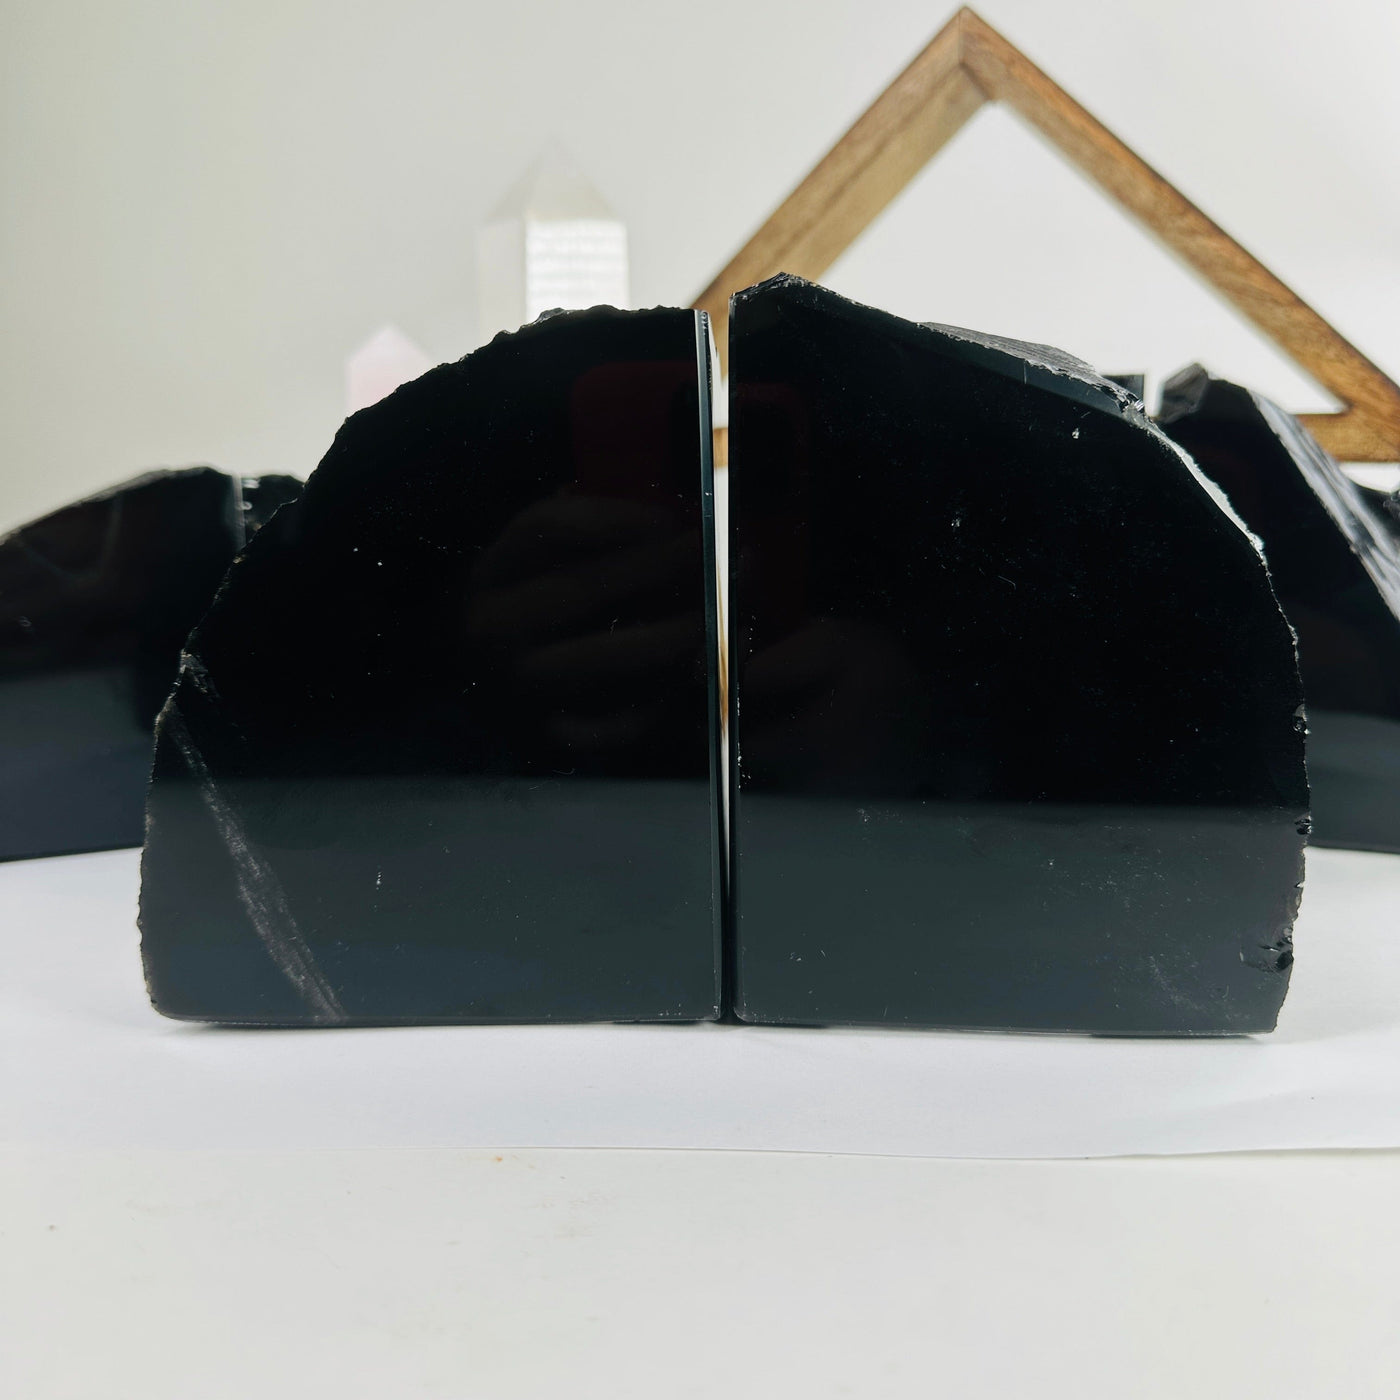 obsidian bookends with decorations in the background